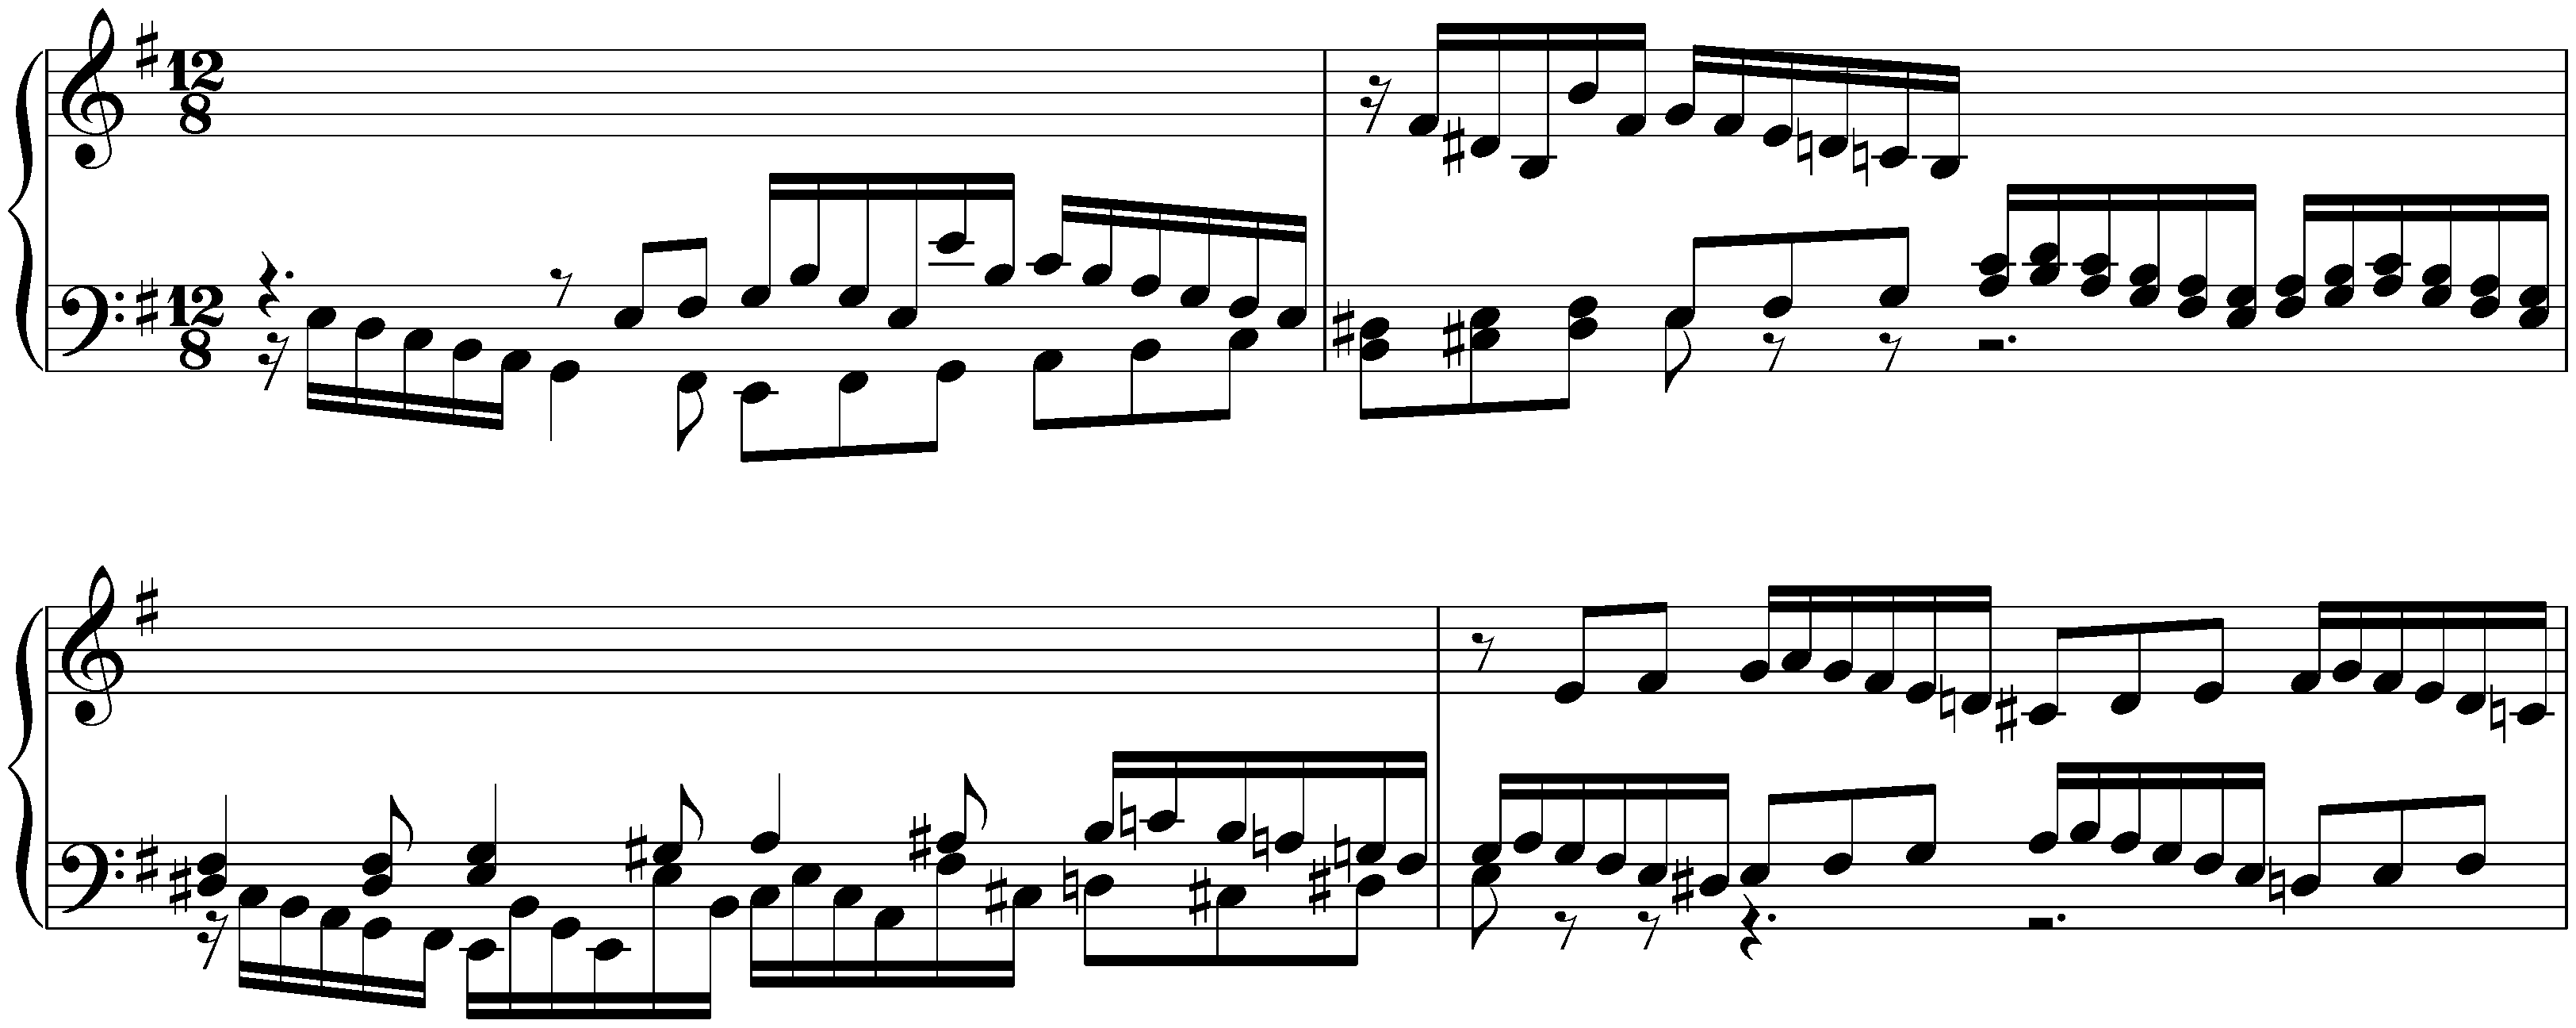 Suite in E minor, BWV 996; 6. Gigue